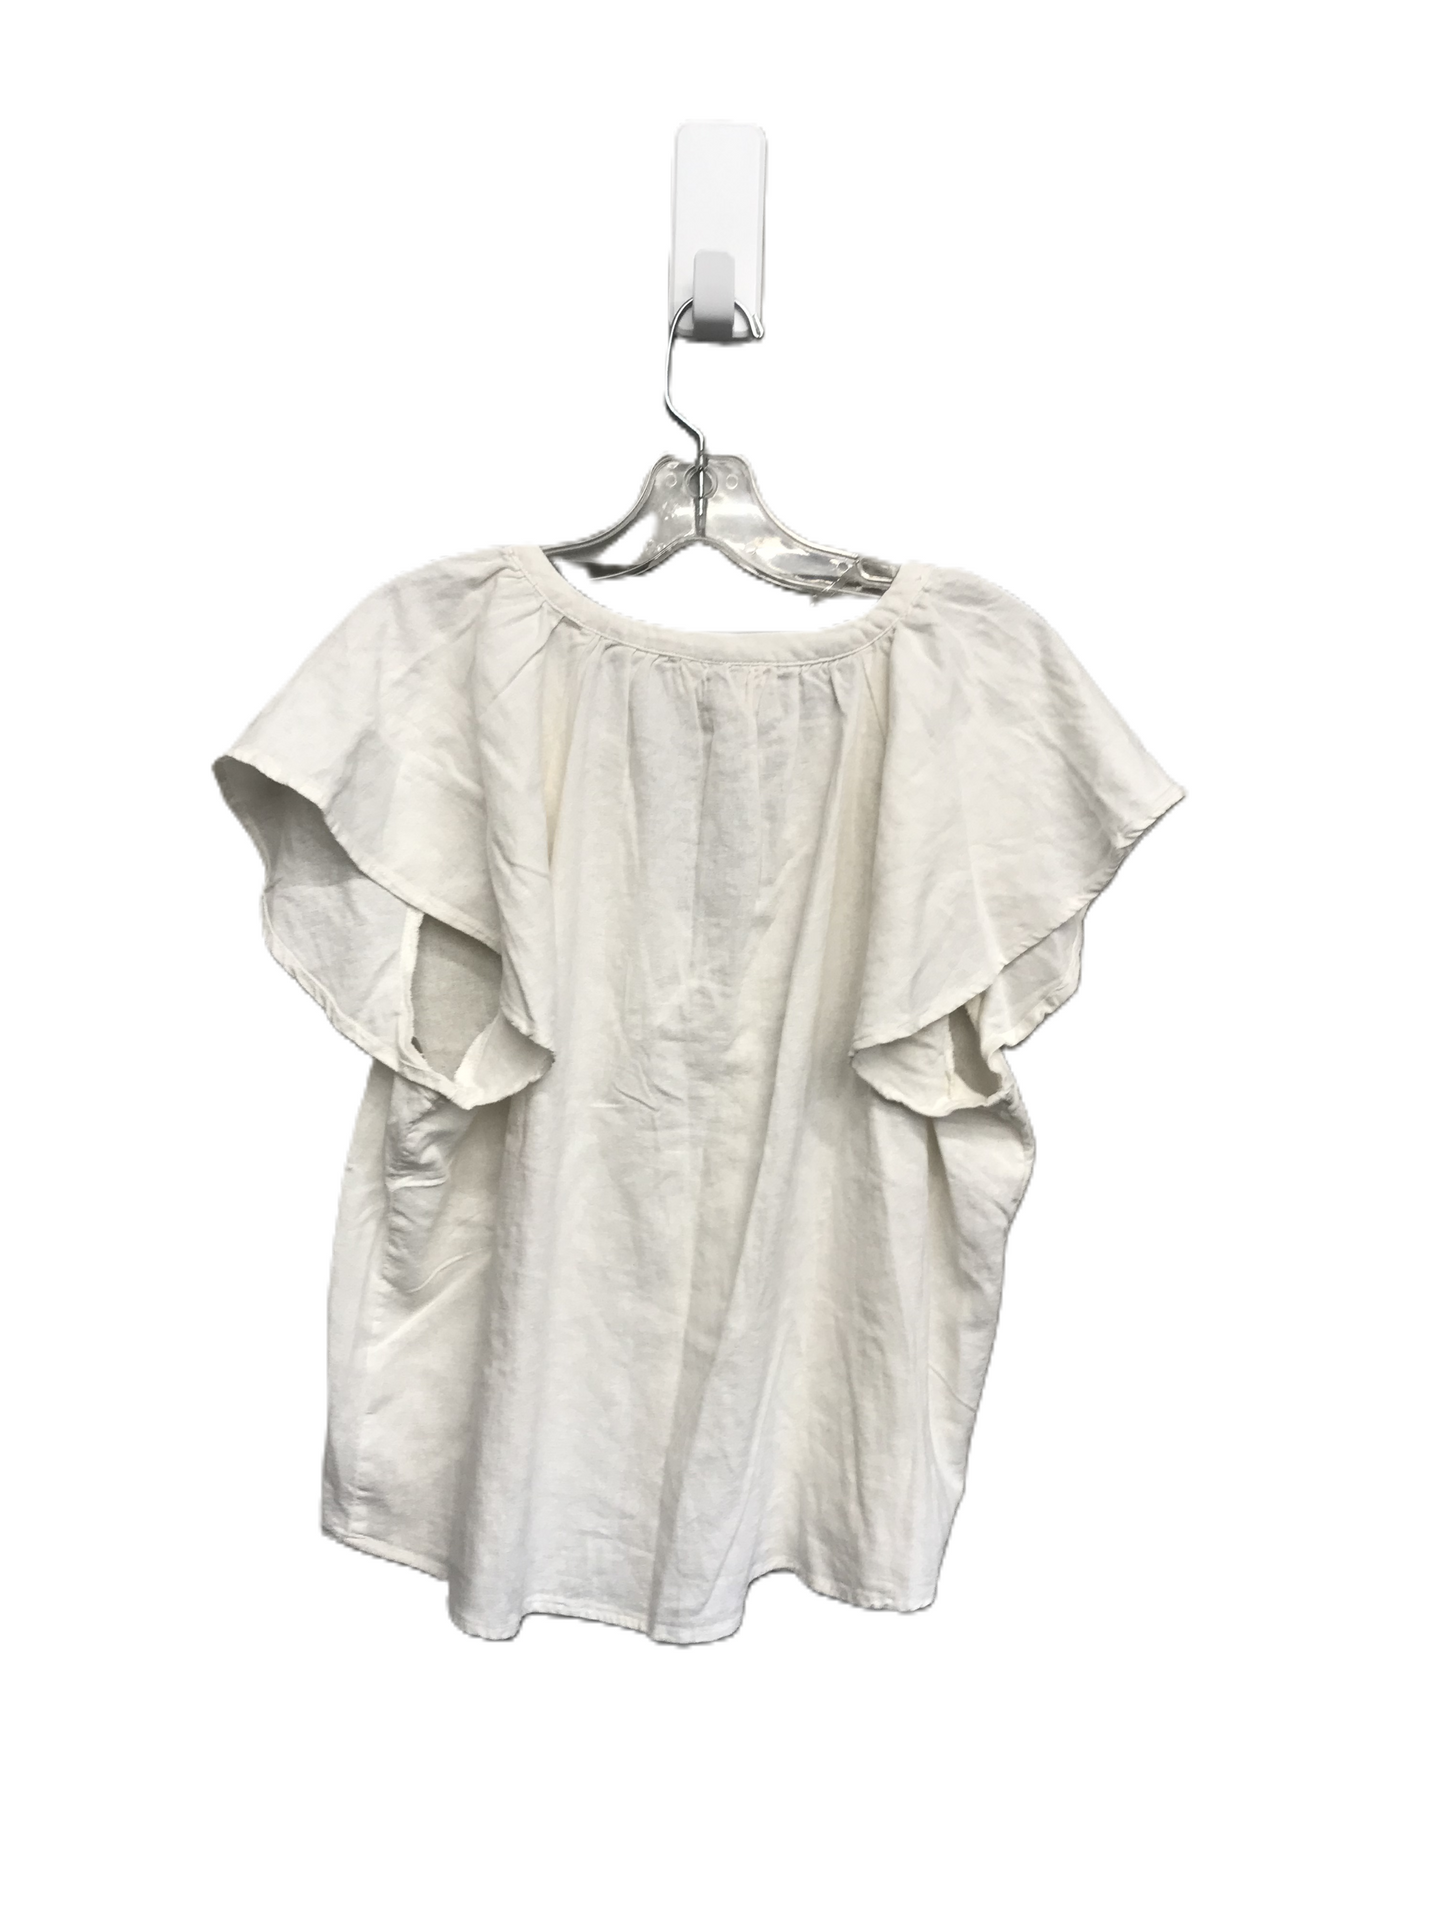 White Top Short Sleeve By Universal Thread, Size: Xl